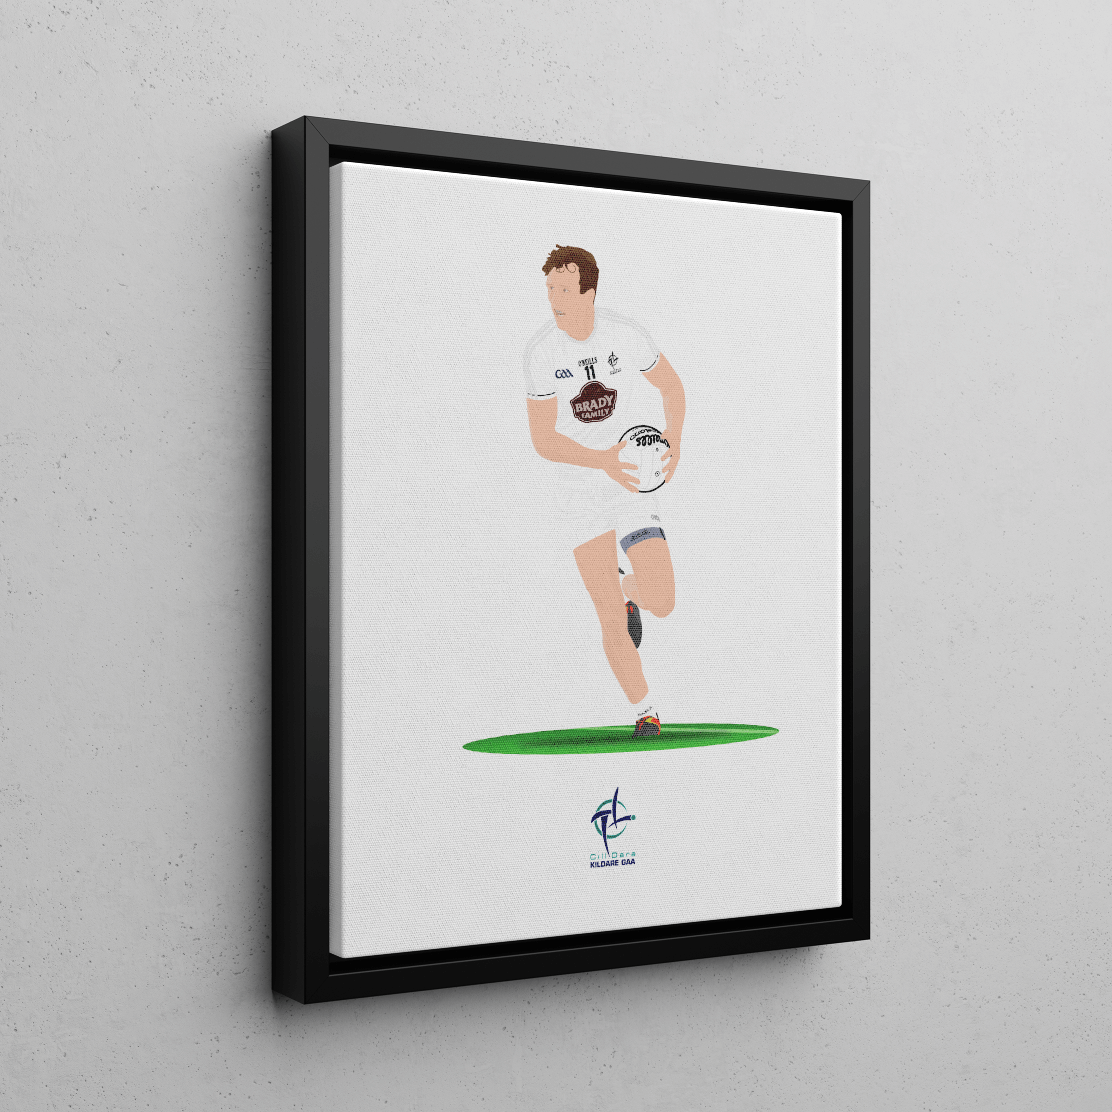 Commission - Framed Canvas - Football